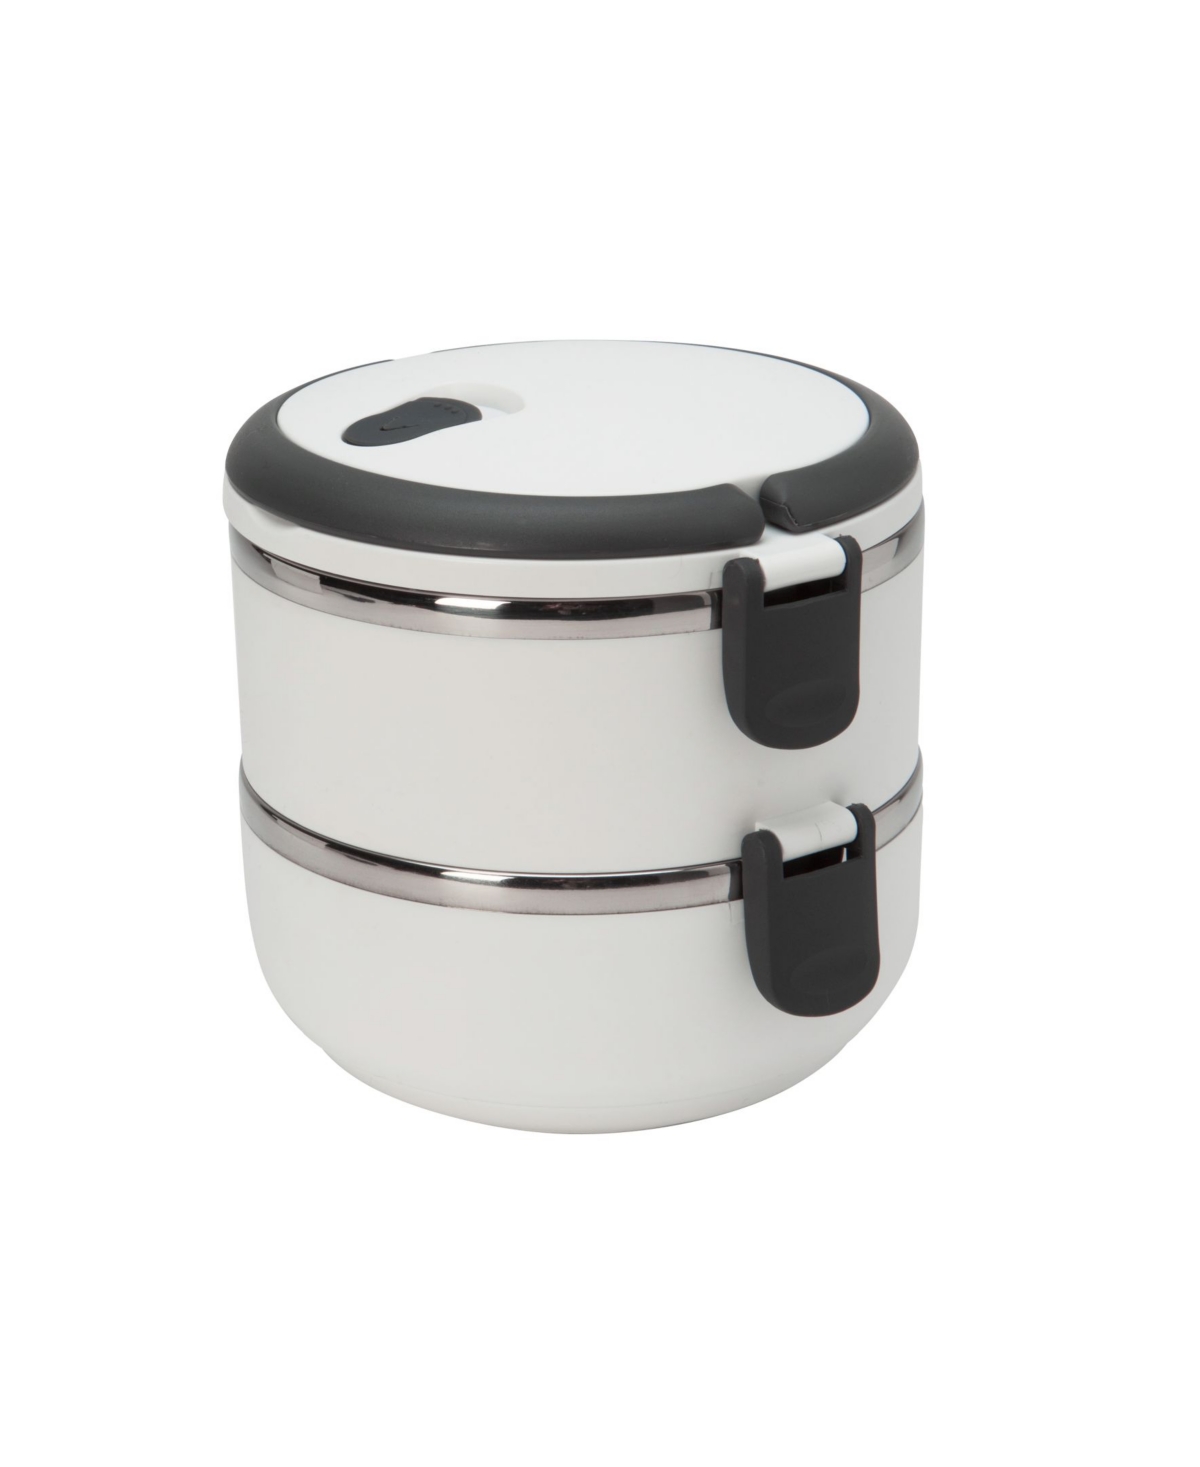 2 Tier Stainless Steel Insulated Lunch Box - White